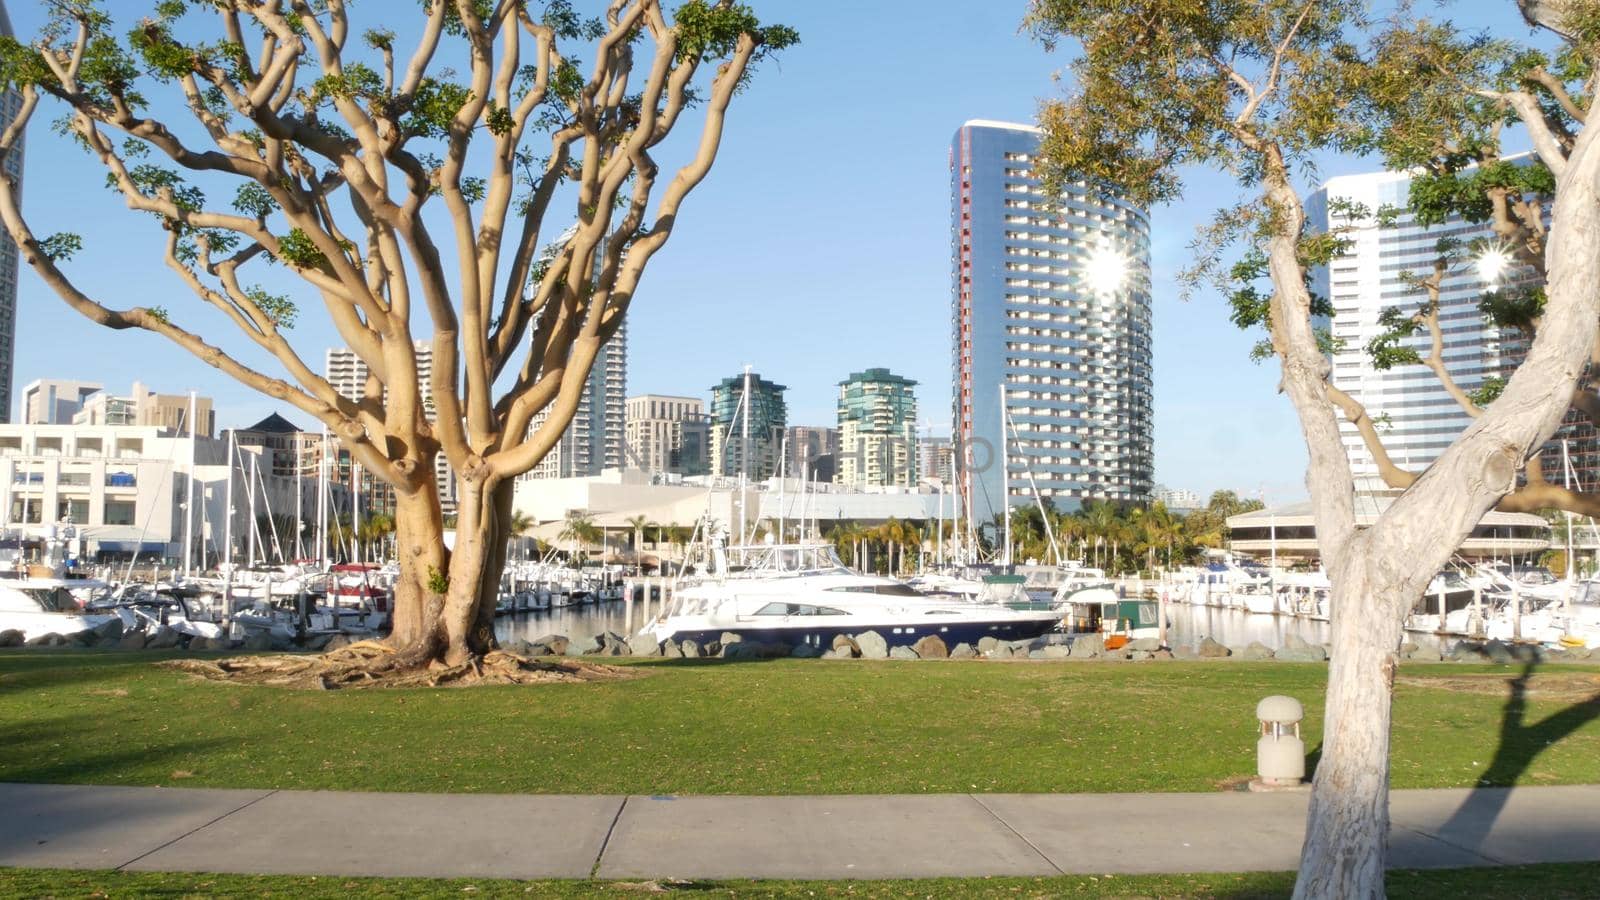 Embarcadero marina park, big coral trees near USS Midway and Convention Center, Seaport Village, San Diego, California USA. Luxury yachts and hotels, metropolis urban skyline and highrise skyscrapers by DogoraSun